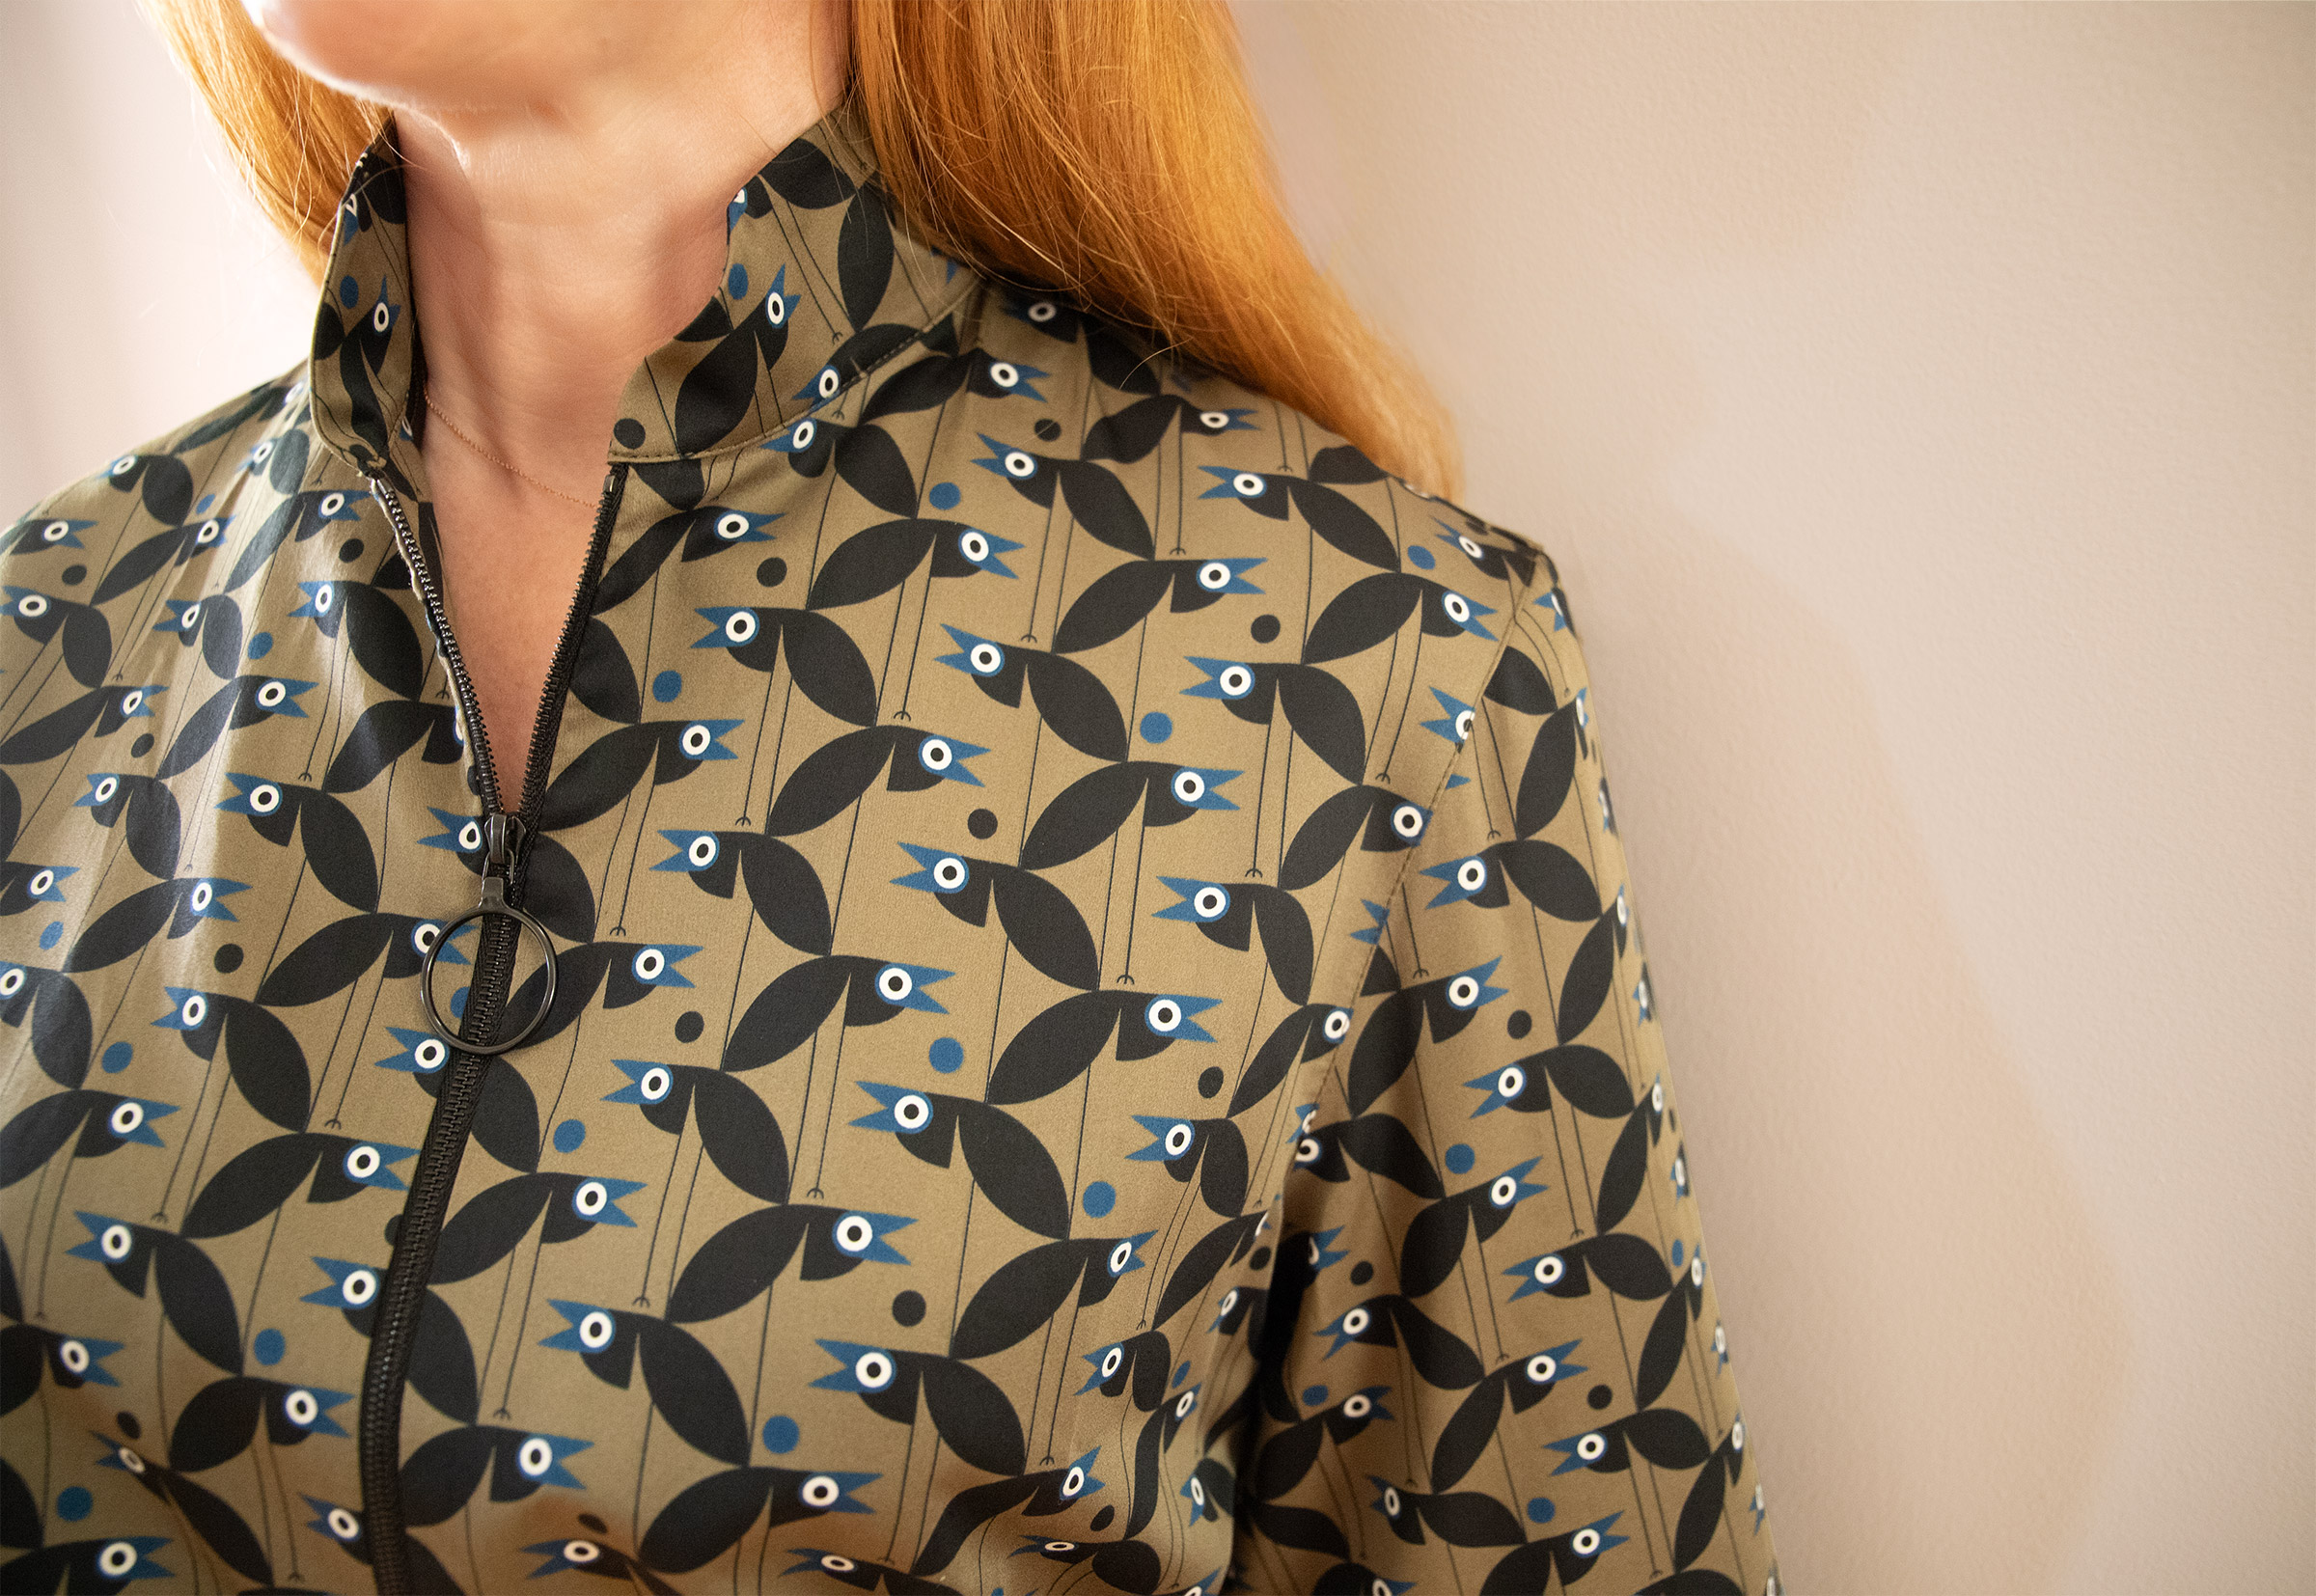 red haired woman close up wearing an olive shirt with zipper front and black and blue crows pattern